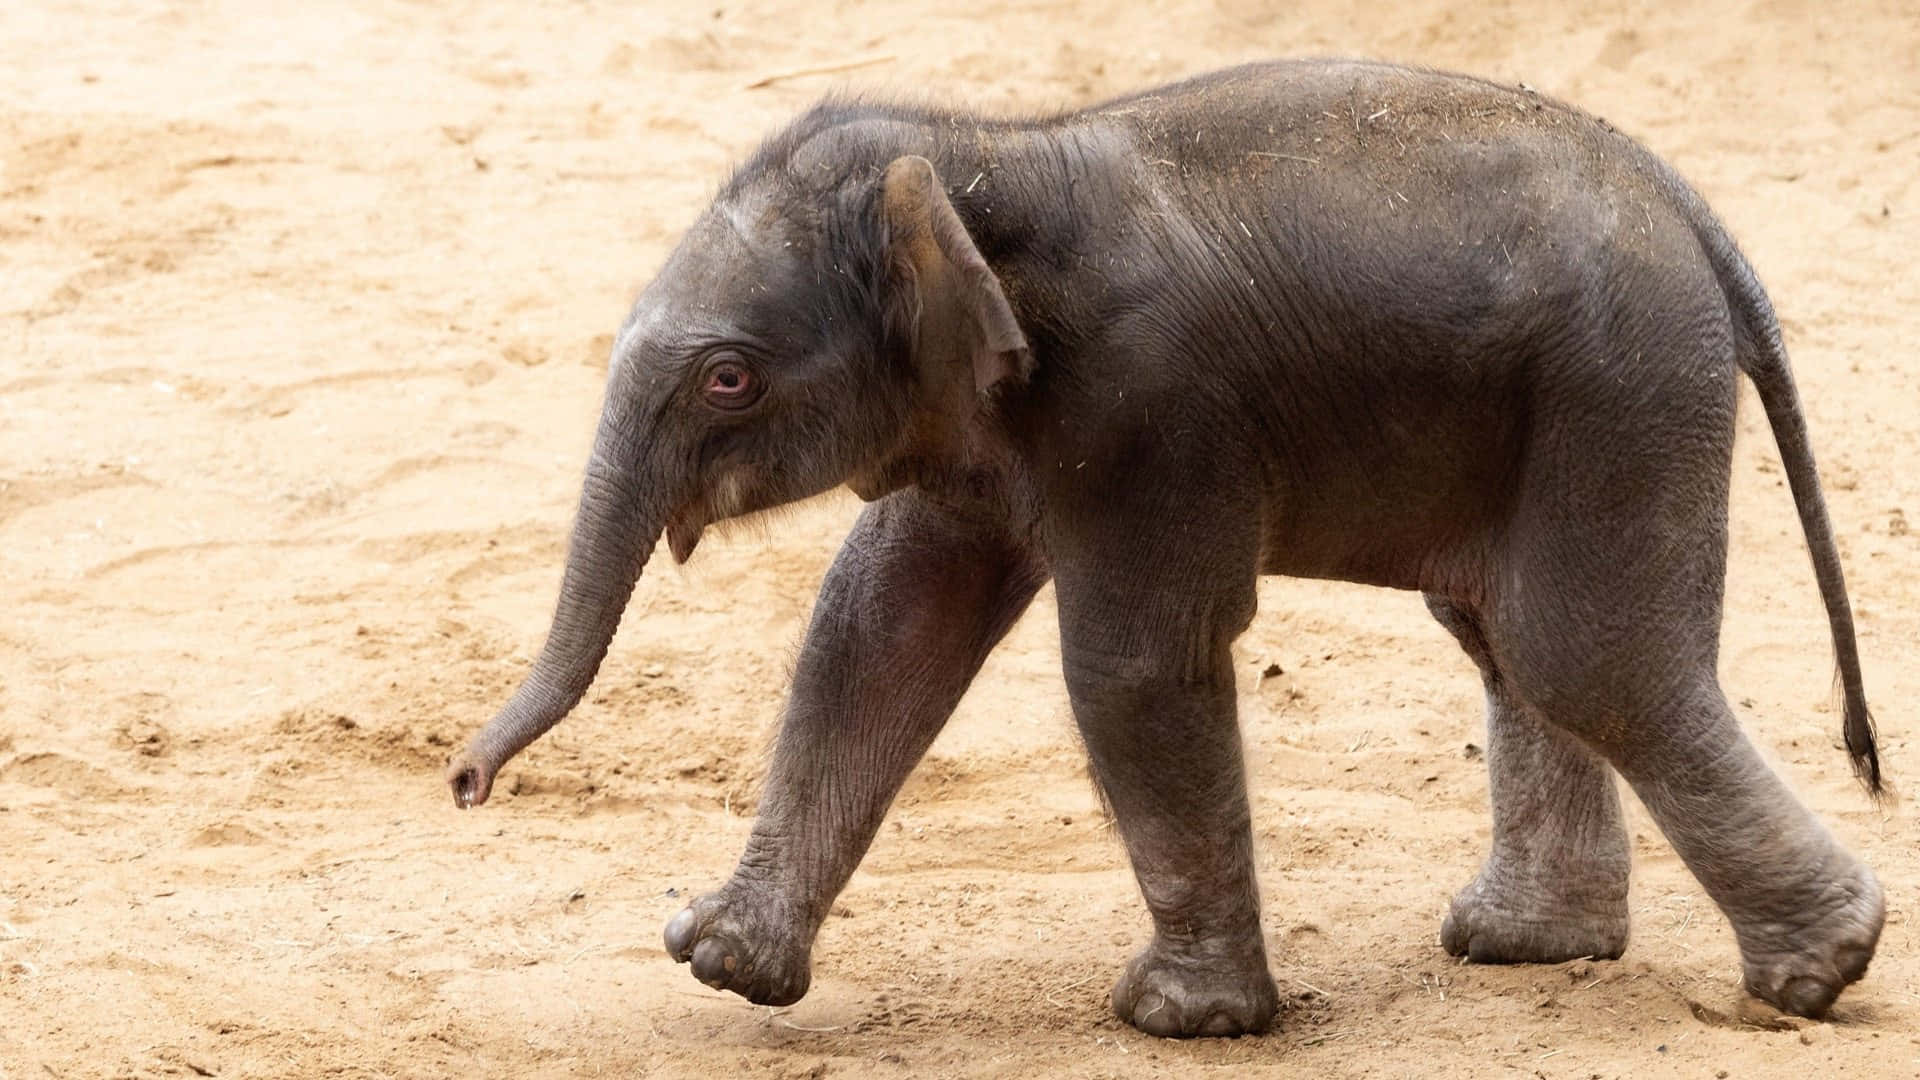 Dainty Baby Elephant Picture